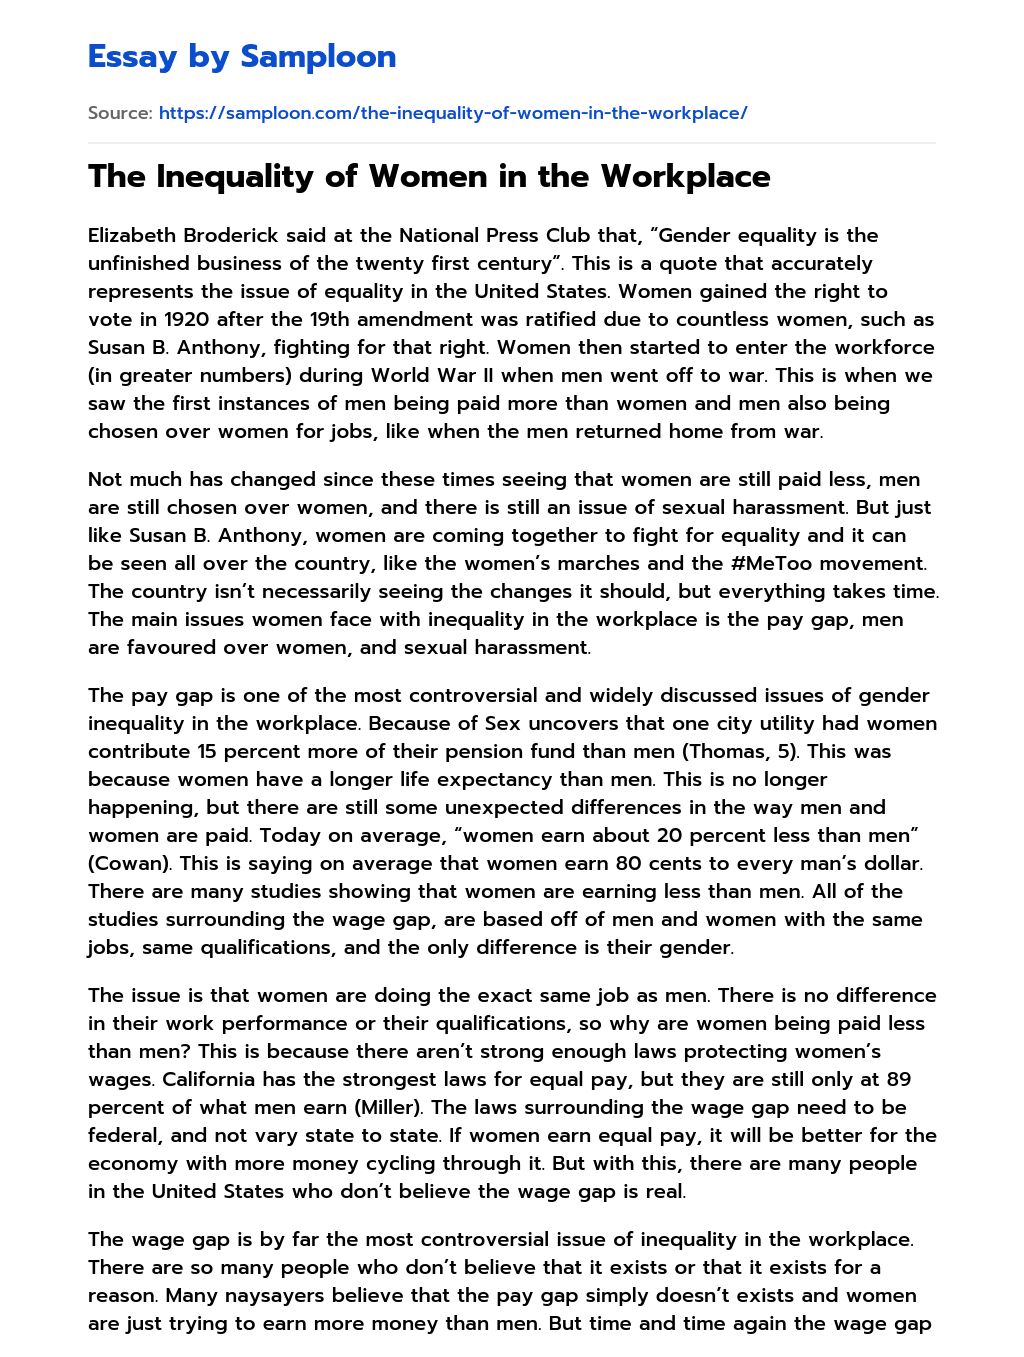 The Inequality of Women in the Workplace essay